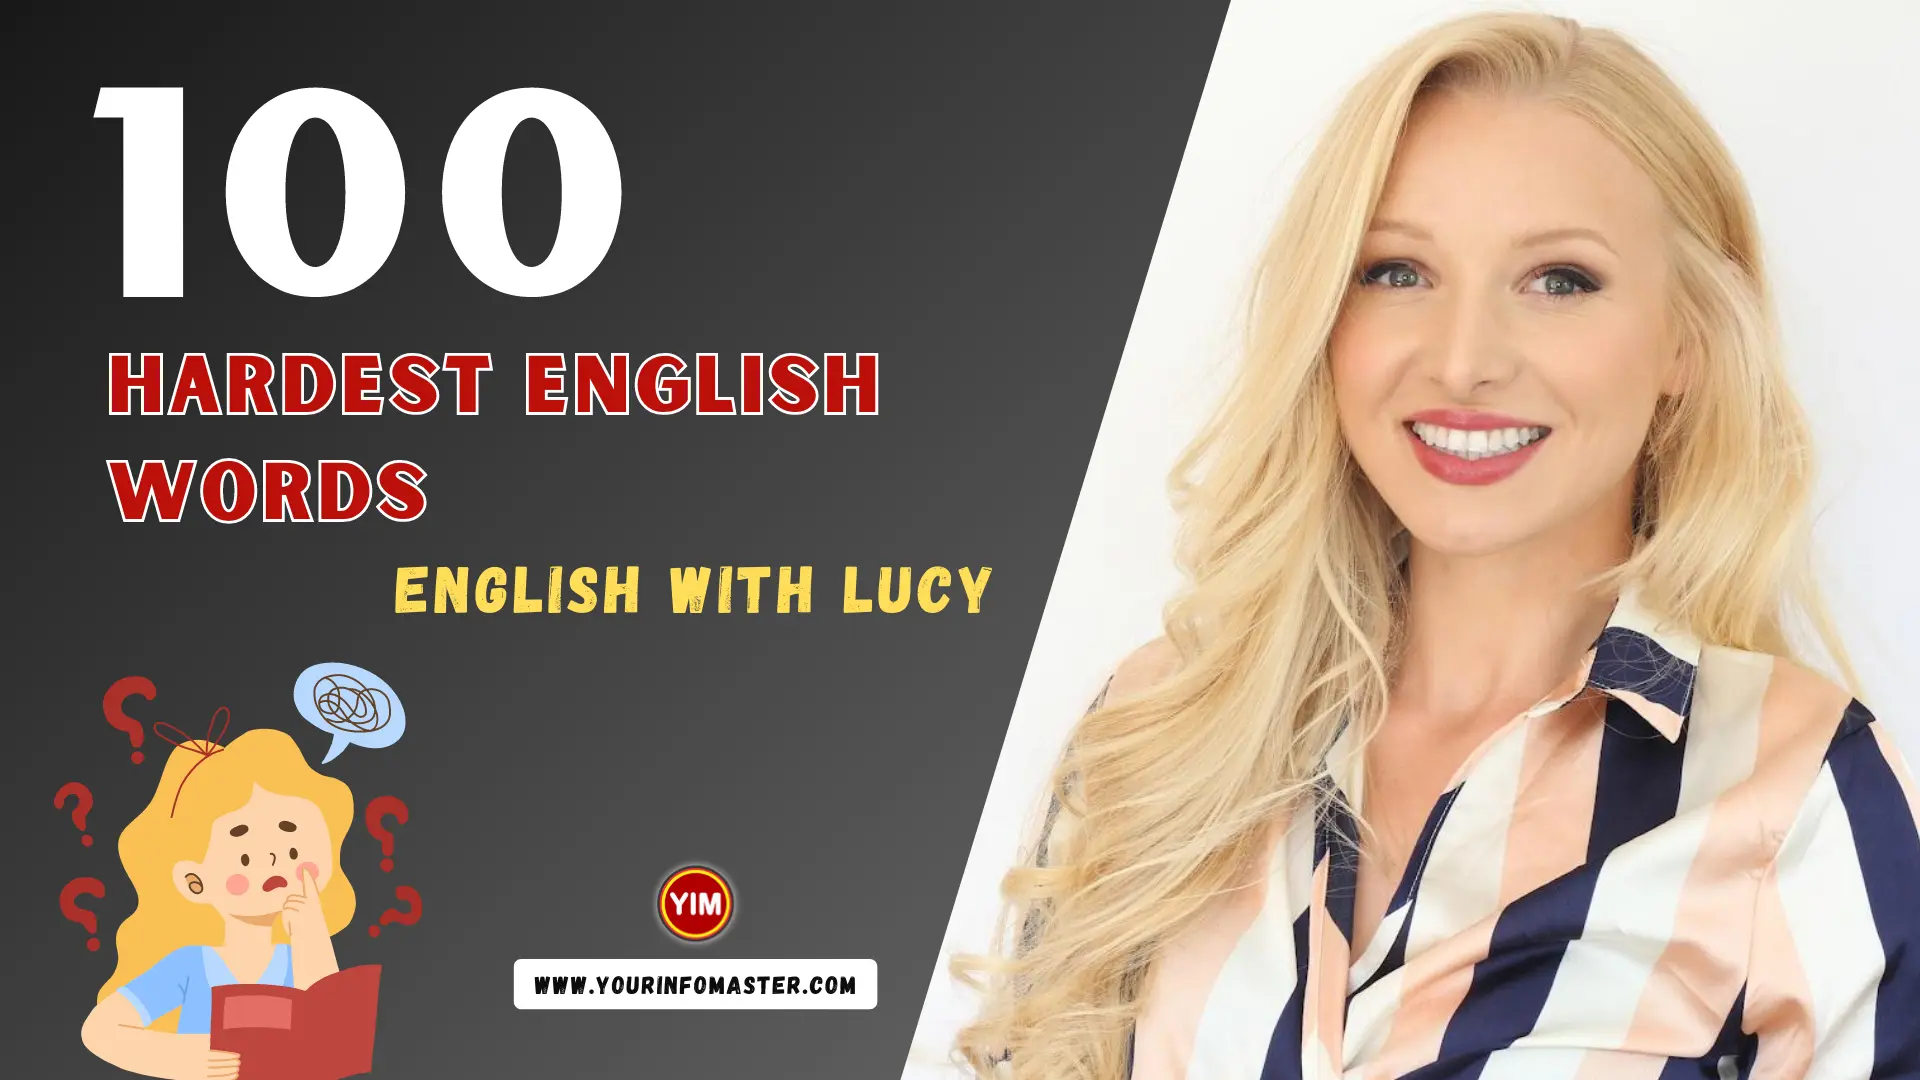 100 HARDEST English Words - English With Lucy